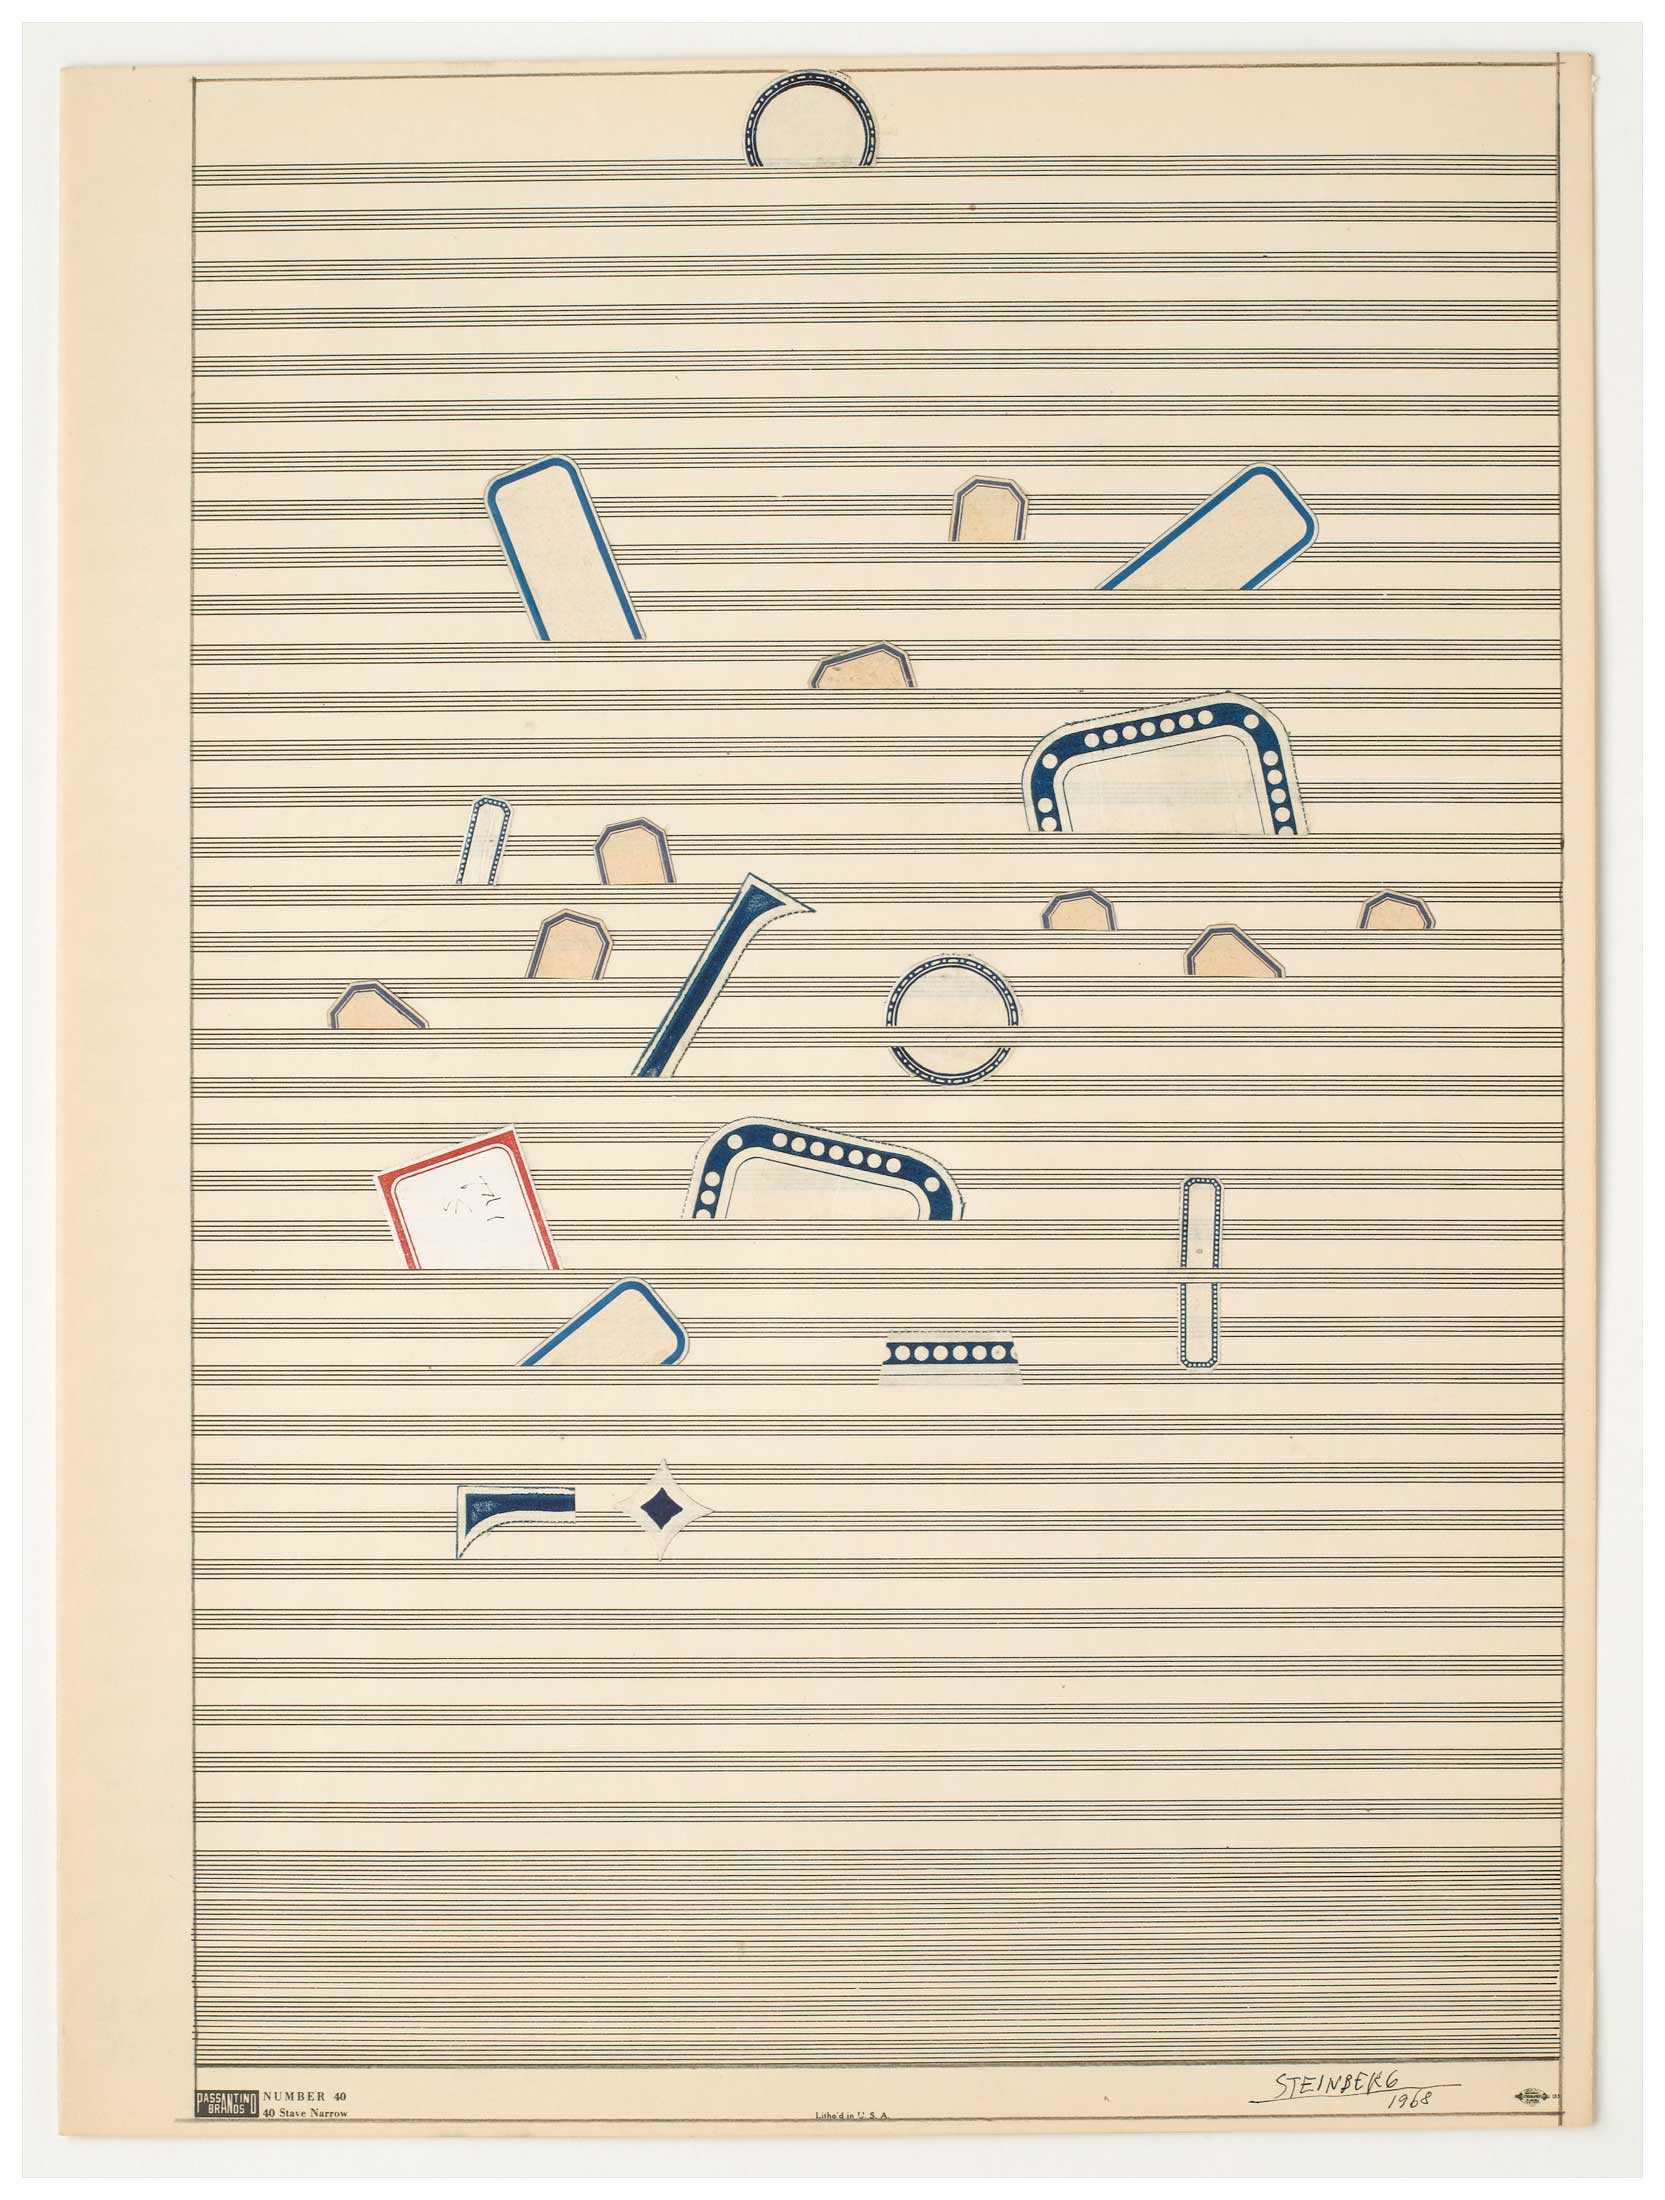 <em>Untitled</em>, 1968. Labels, pencil, and ink on sheet music paper, 19 x 14 1/8 in. Private collection.